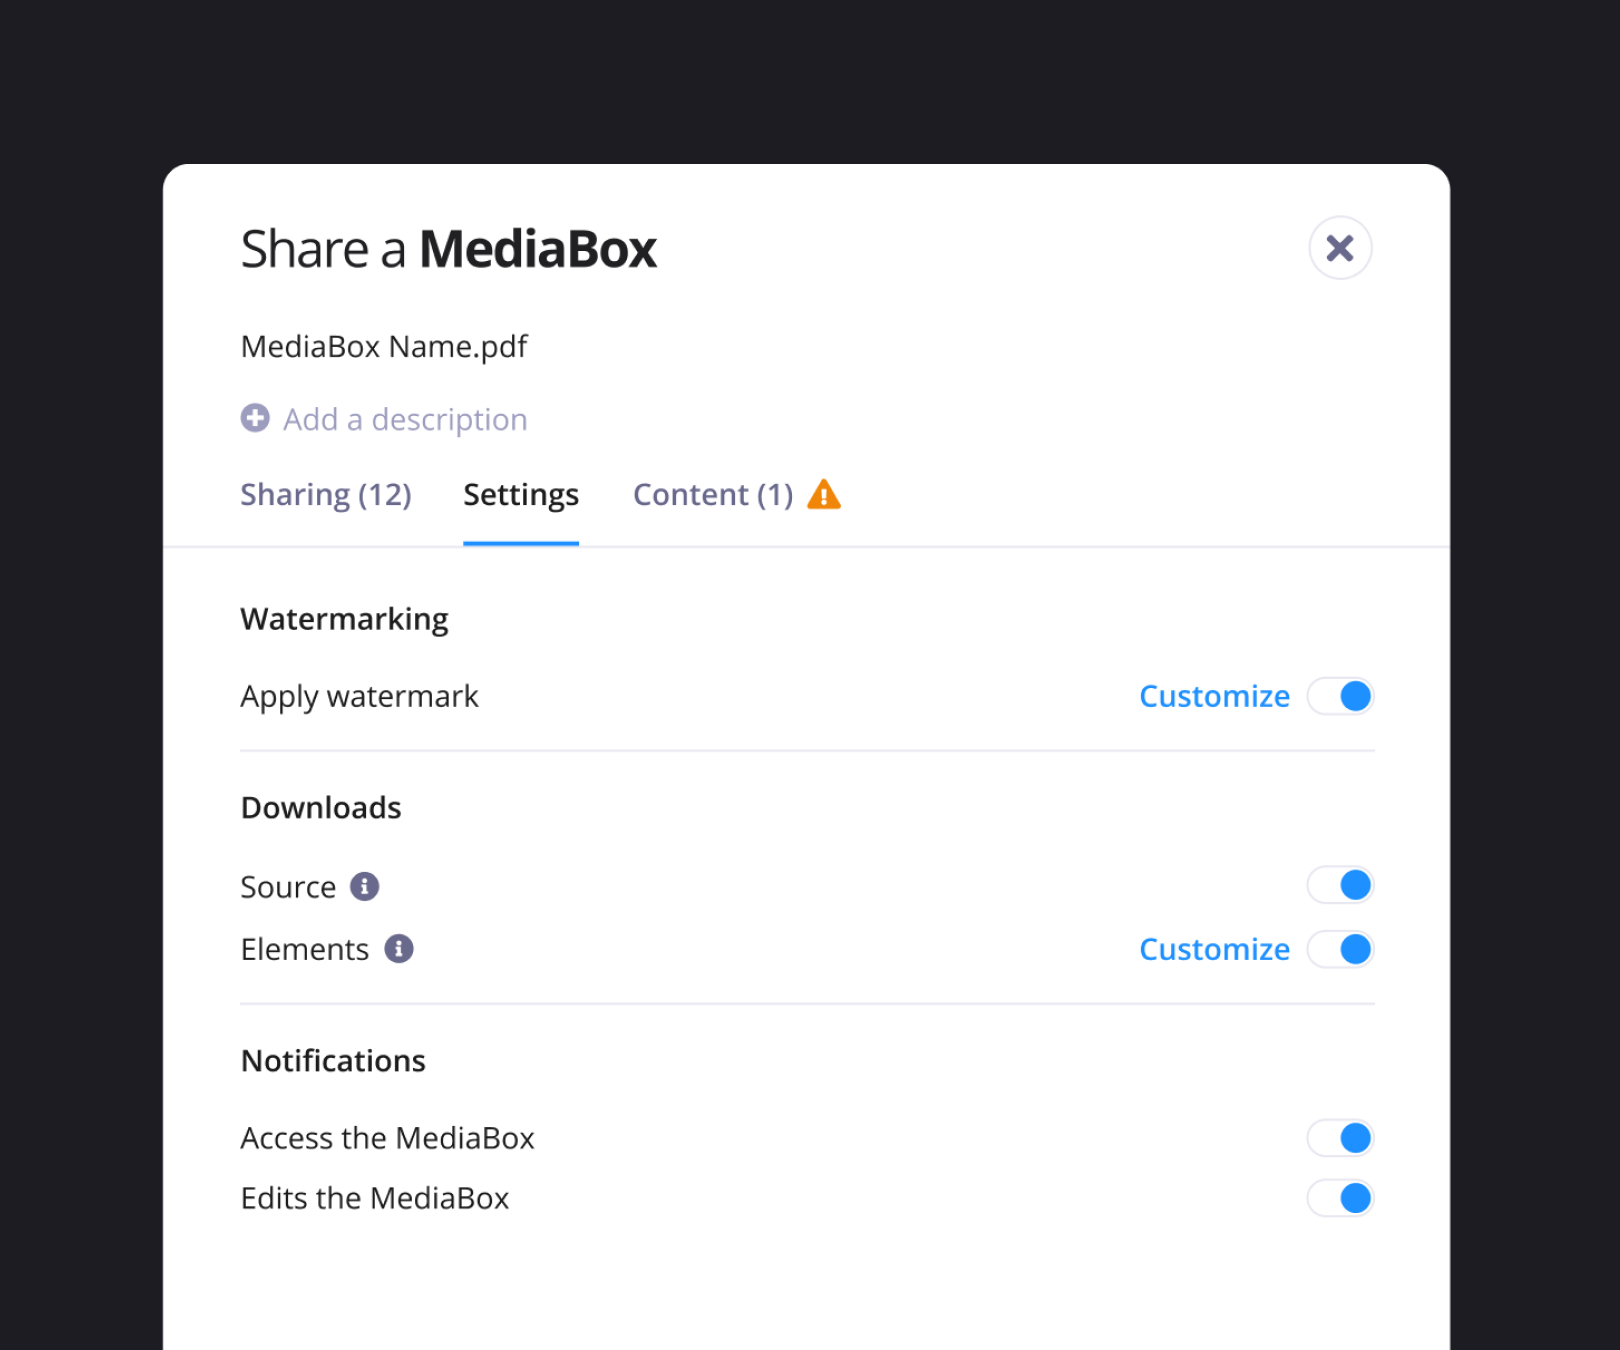 Share files securely with anyone, anywhere with MediaBox